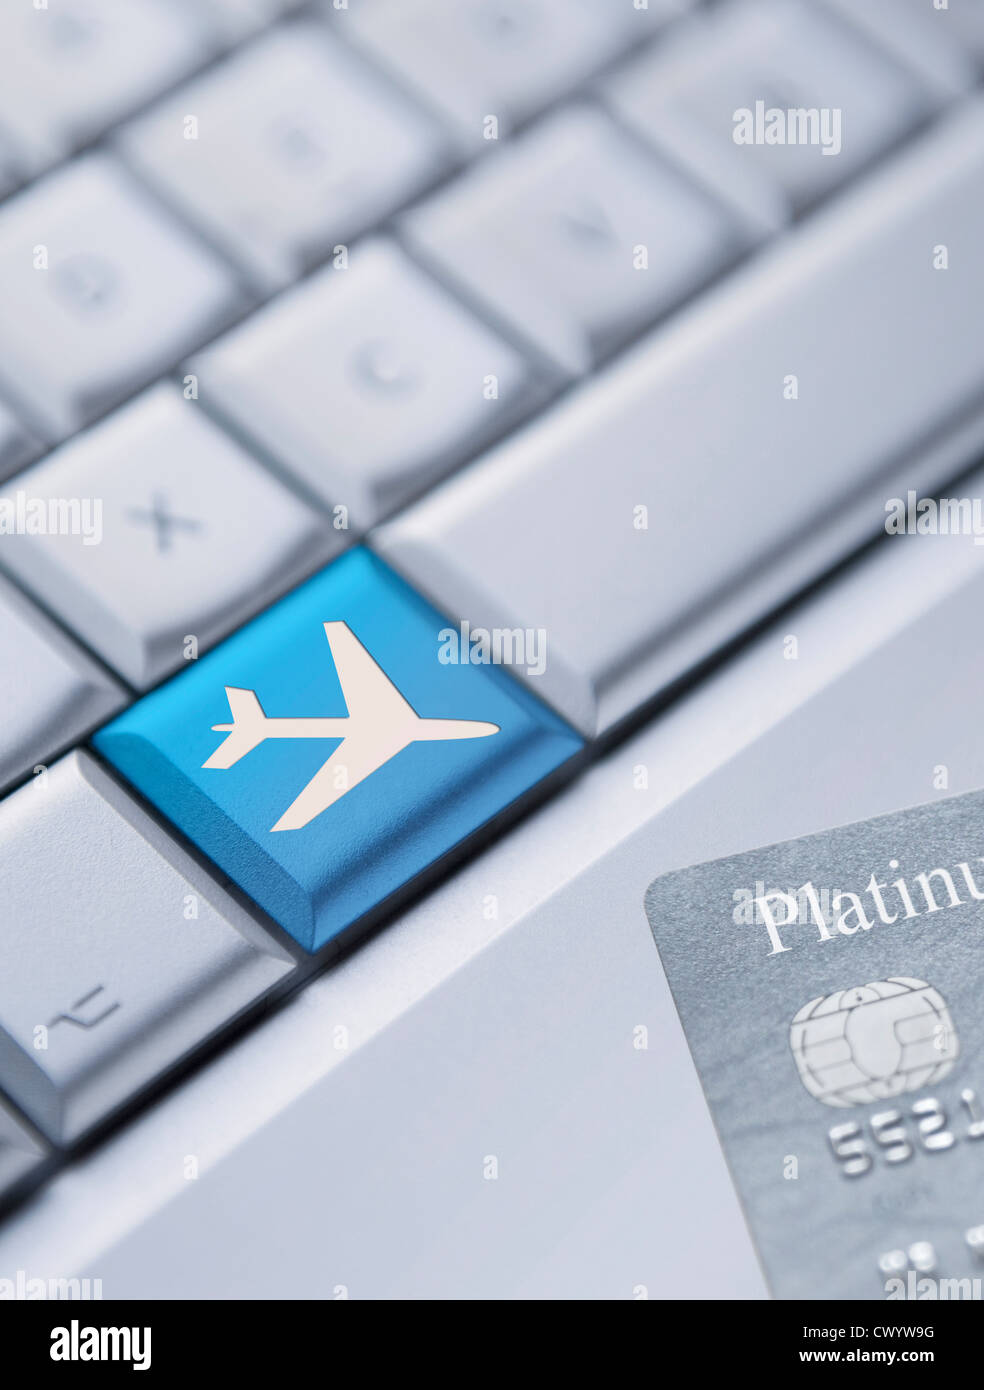 Detail of a laptop keyboard with one blue key with an aeroplane symbol on it and a credit card at the bottom right corner. Stock Photo